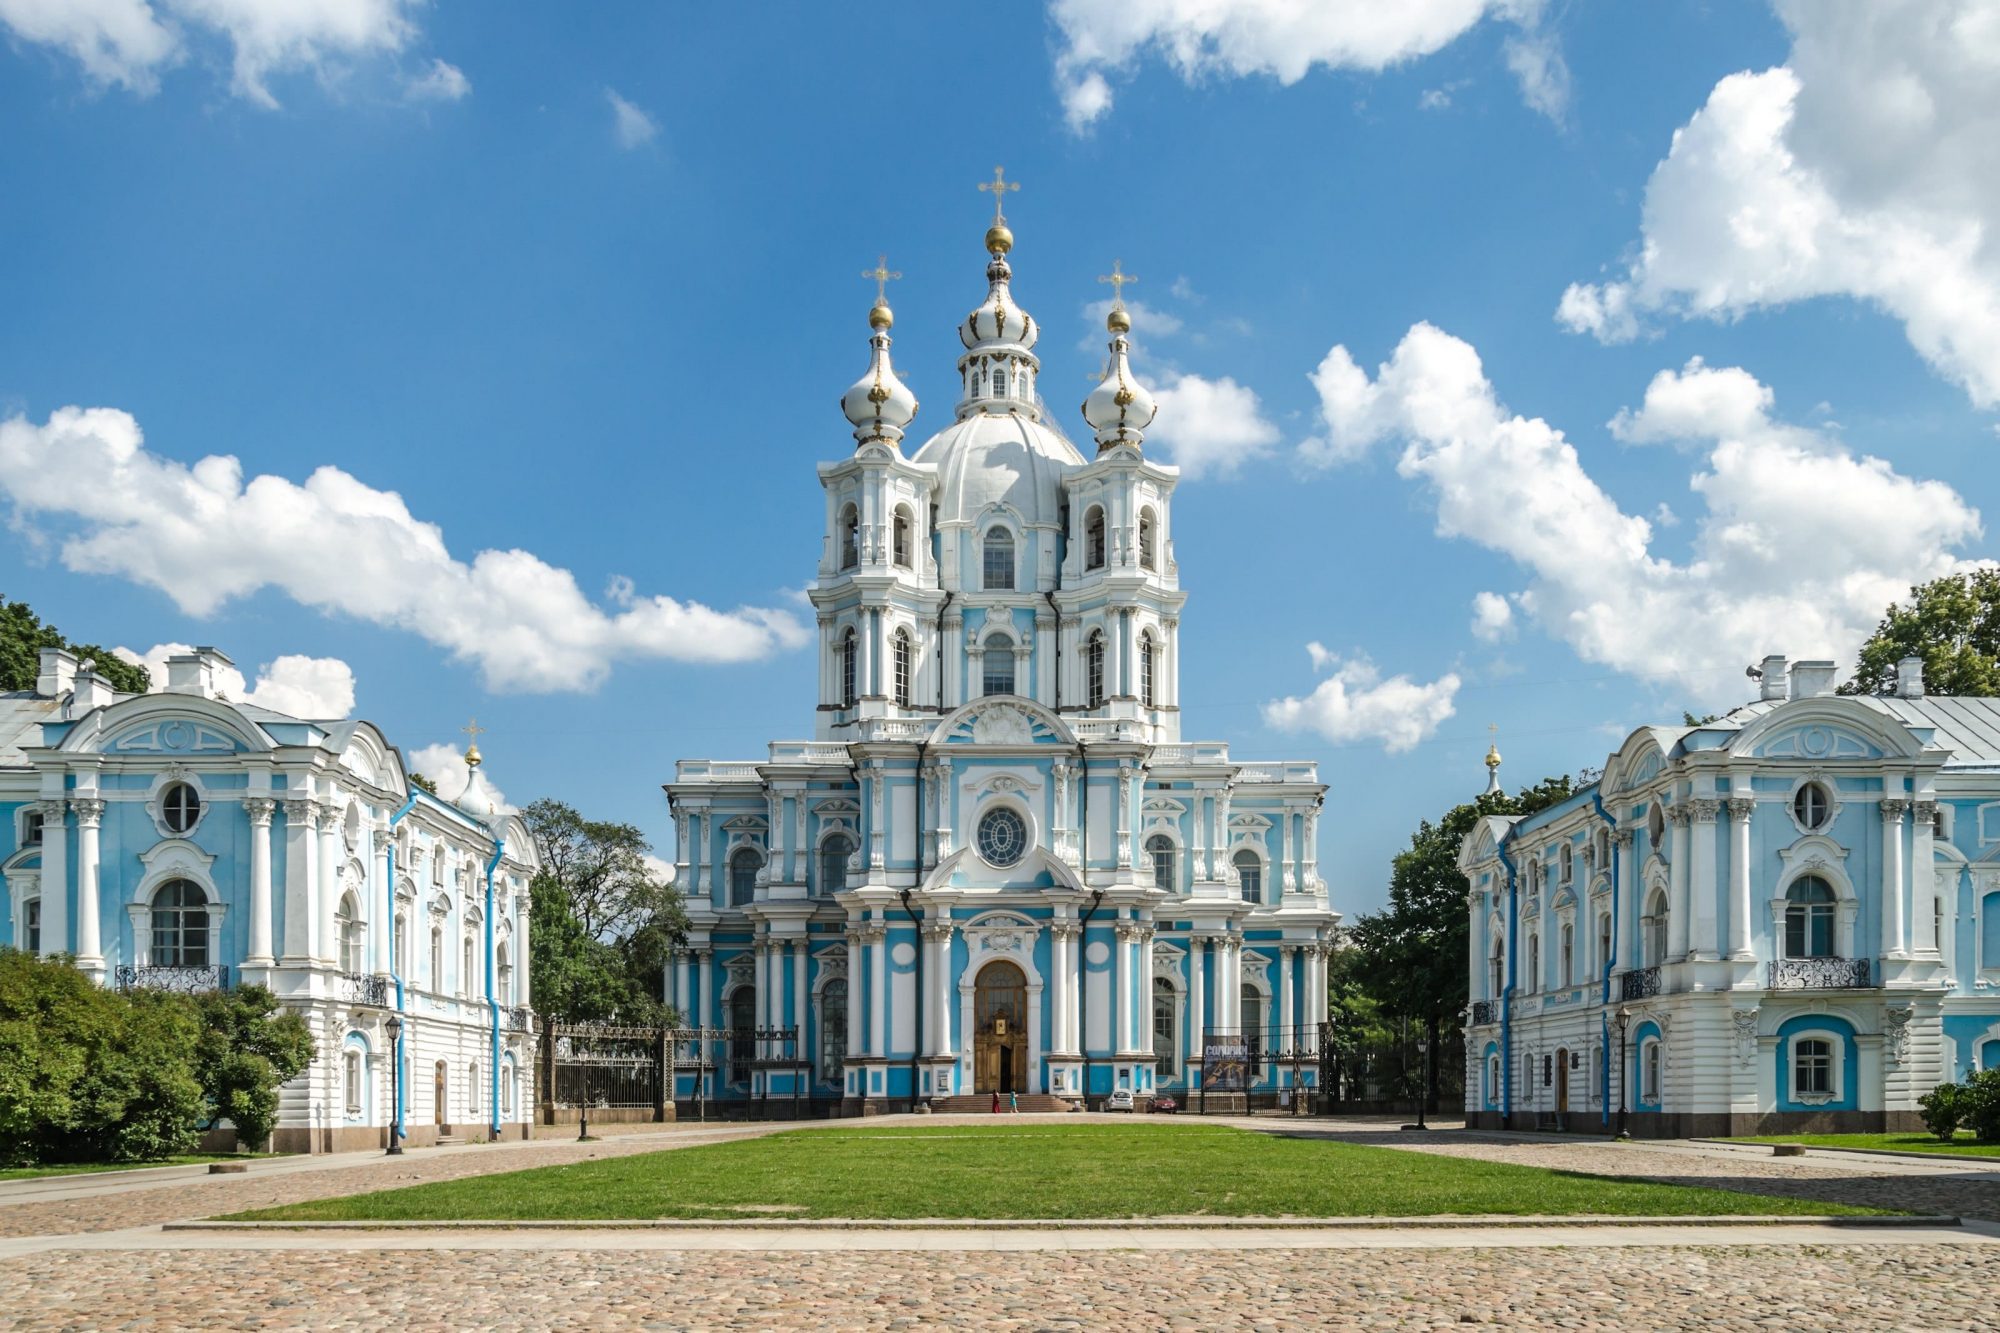 The Smolny Cathedral in St. Petersburg, Russia